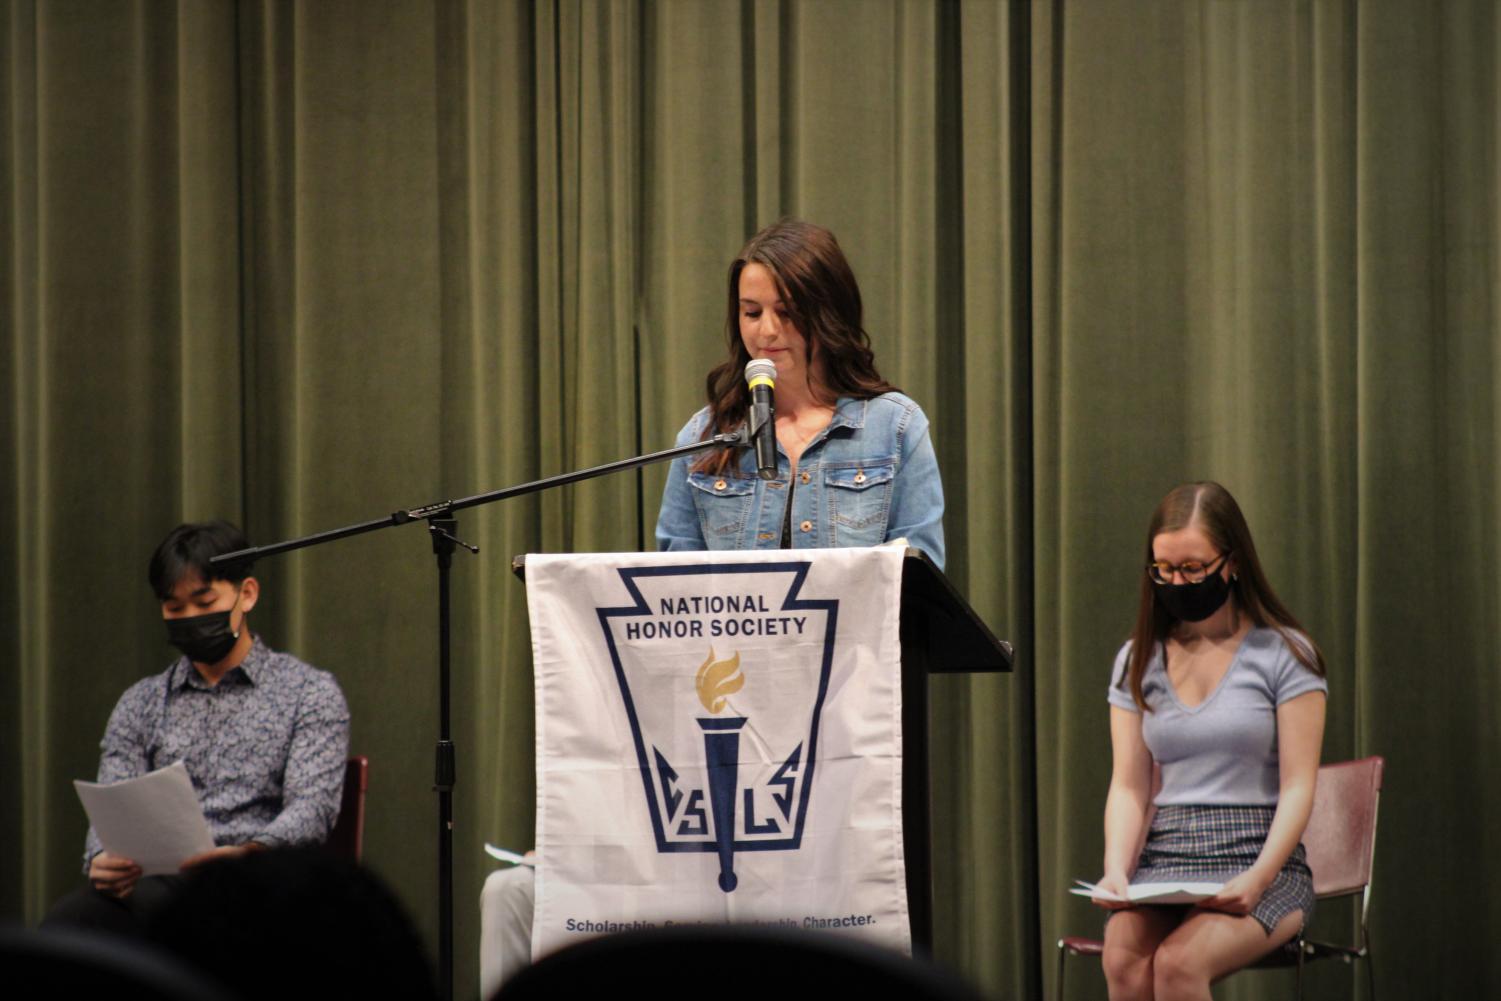 NHS+Inductions+4%2F14%2F21+%28Photos+by+Trenten+Wilder%29